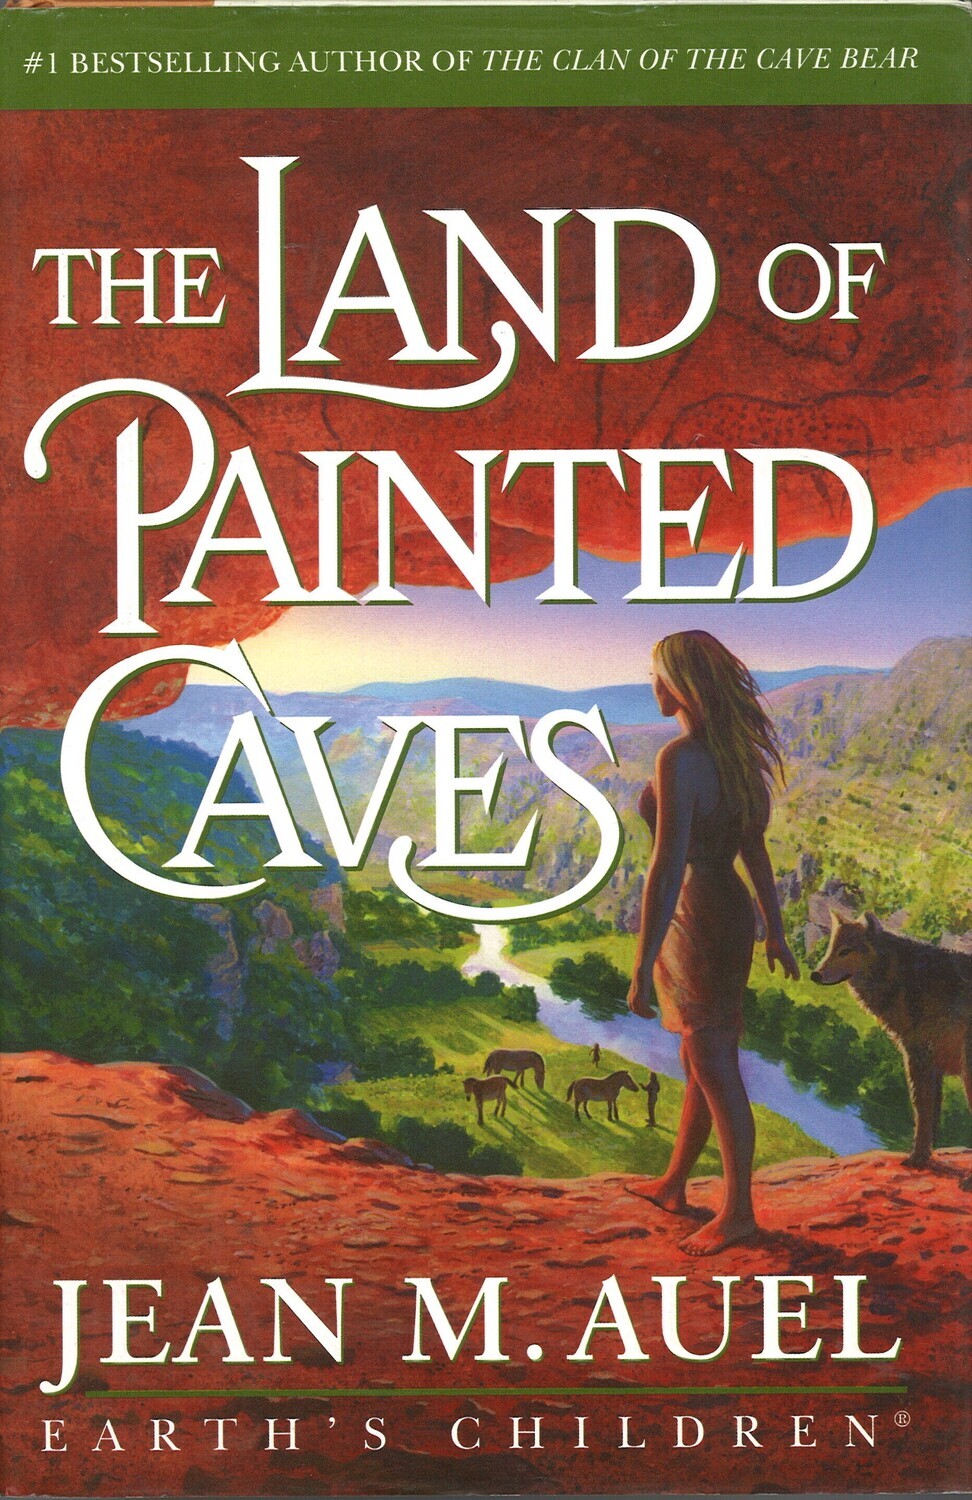 The Land of Painted Caves (Earth's Children Series #06)